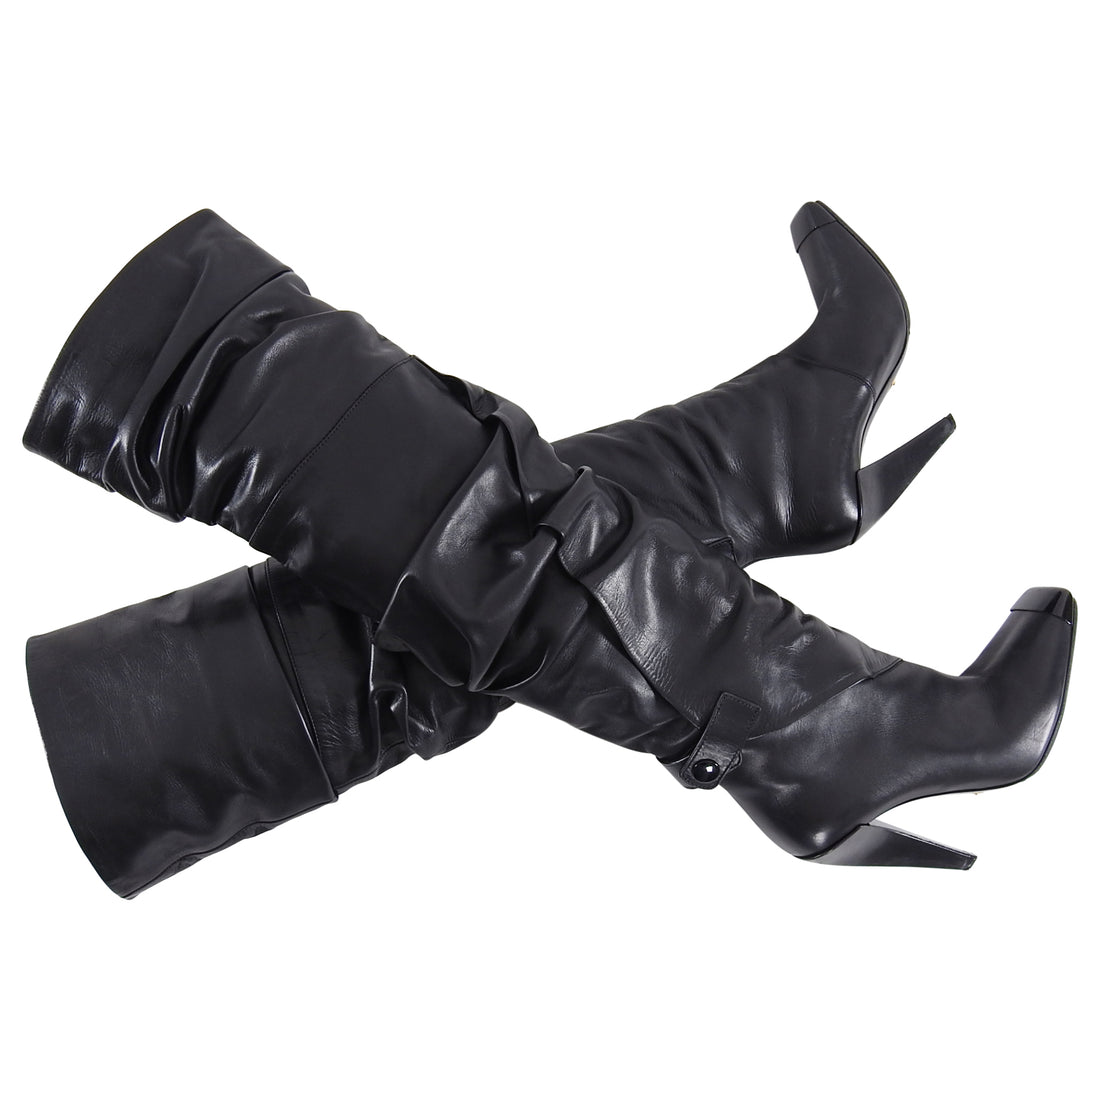 Tom Ford Black Over the Knee Black Leather Boots  - 40.5